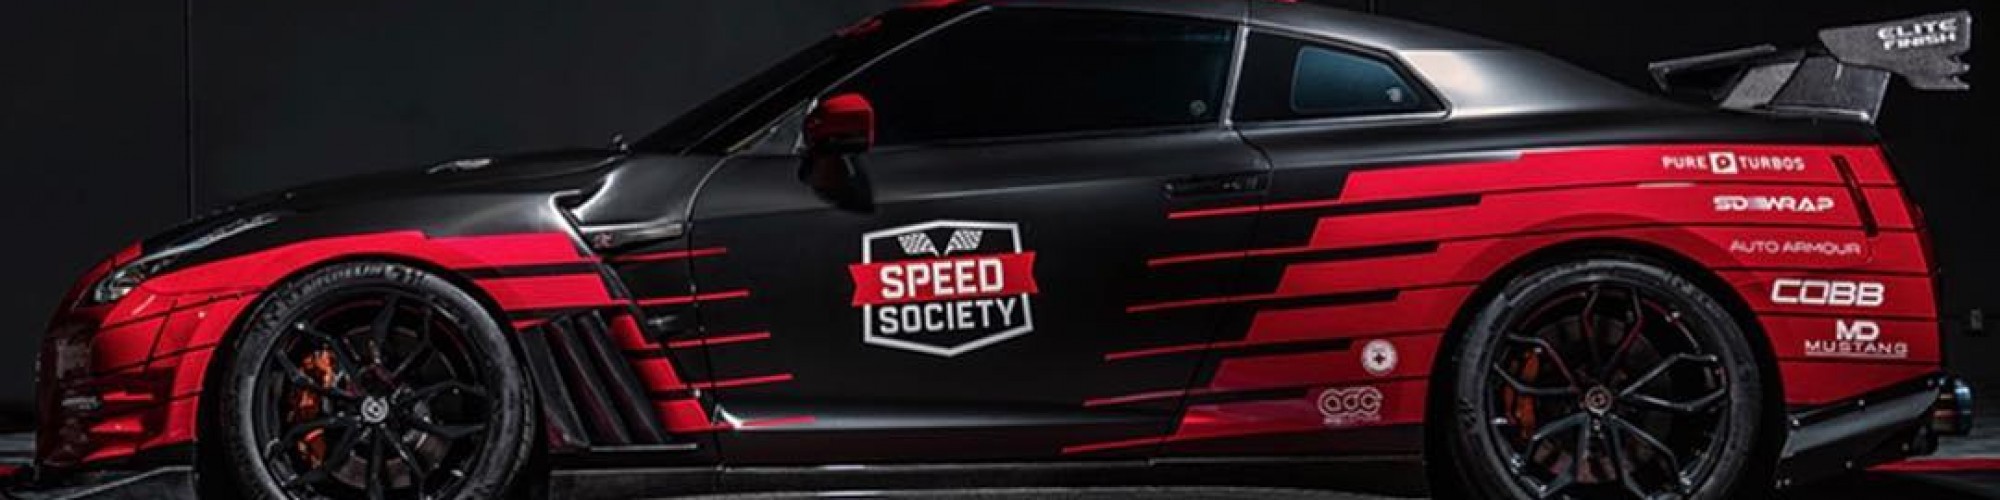 Speed Society LLC cover image